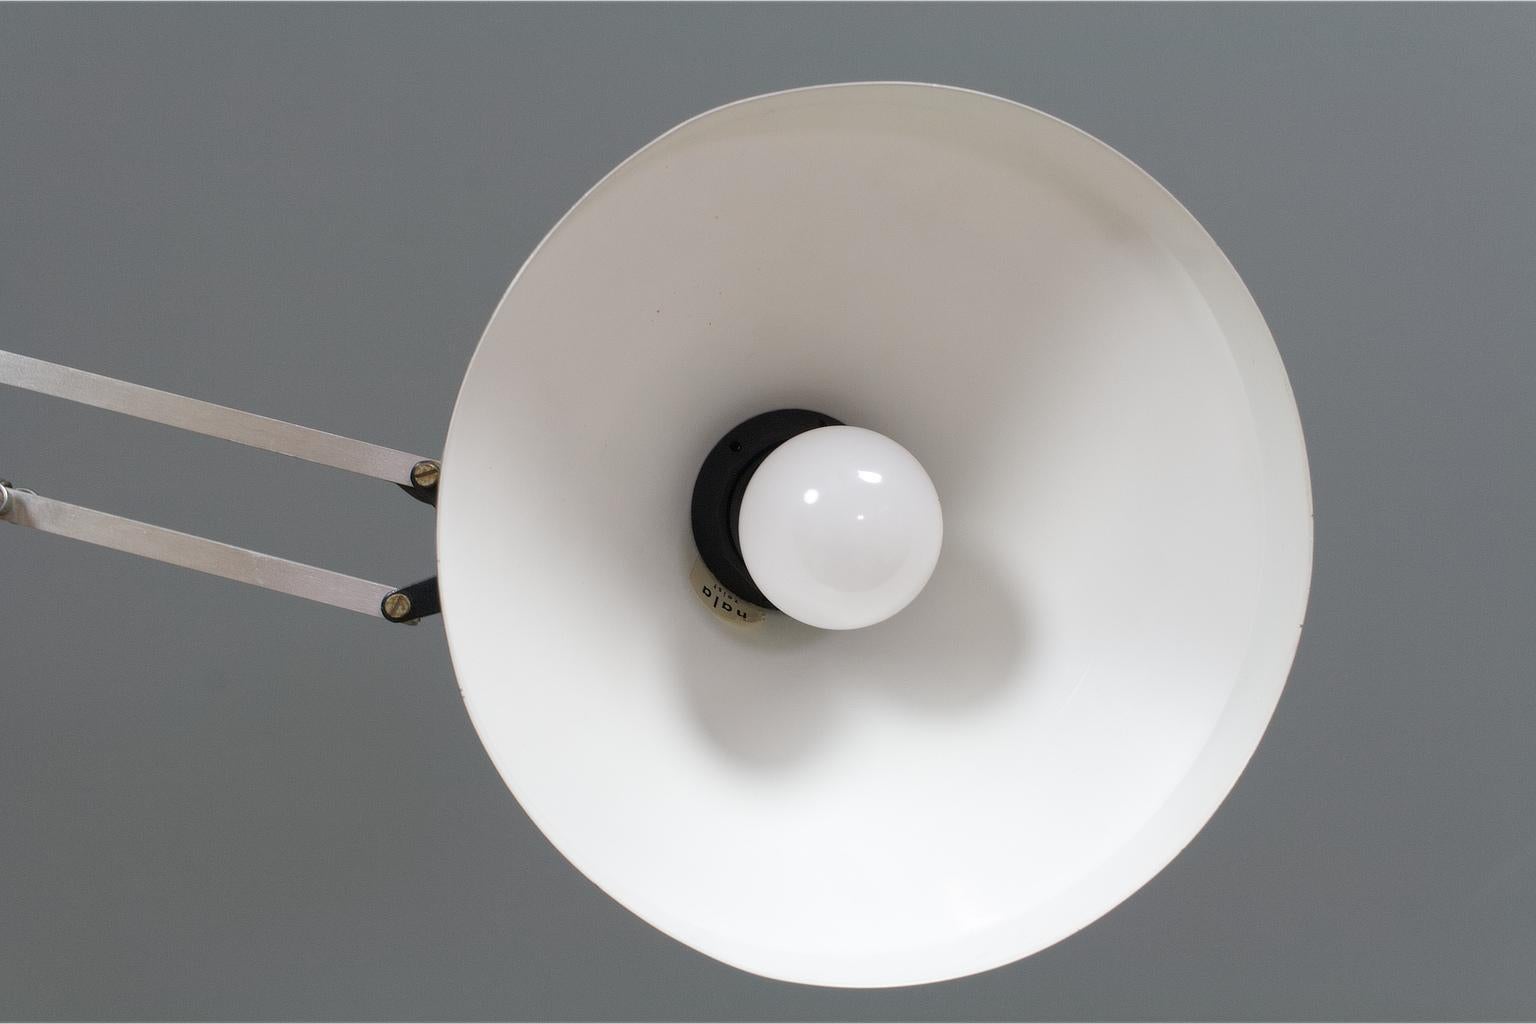 Large Mid-Century Modern Desk Light or Table Lamp in White by Hala 1967, T9 1